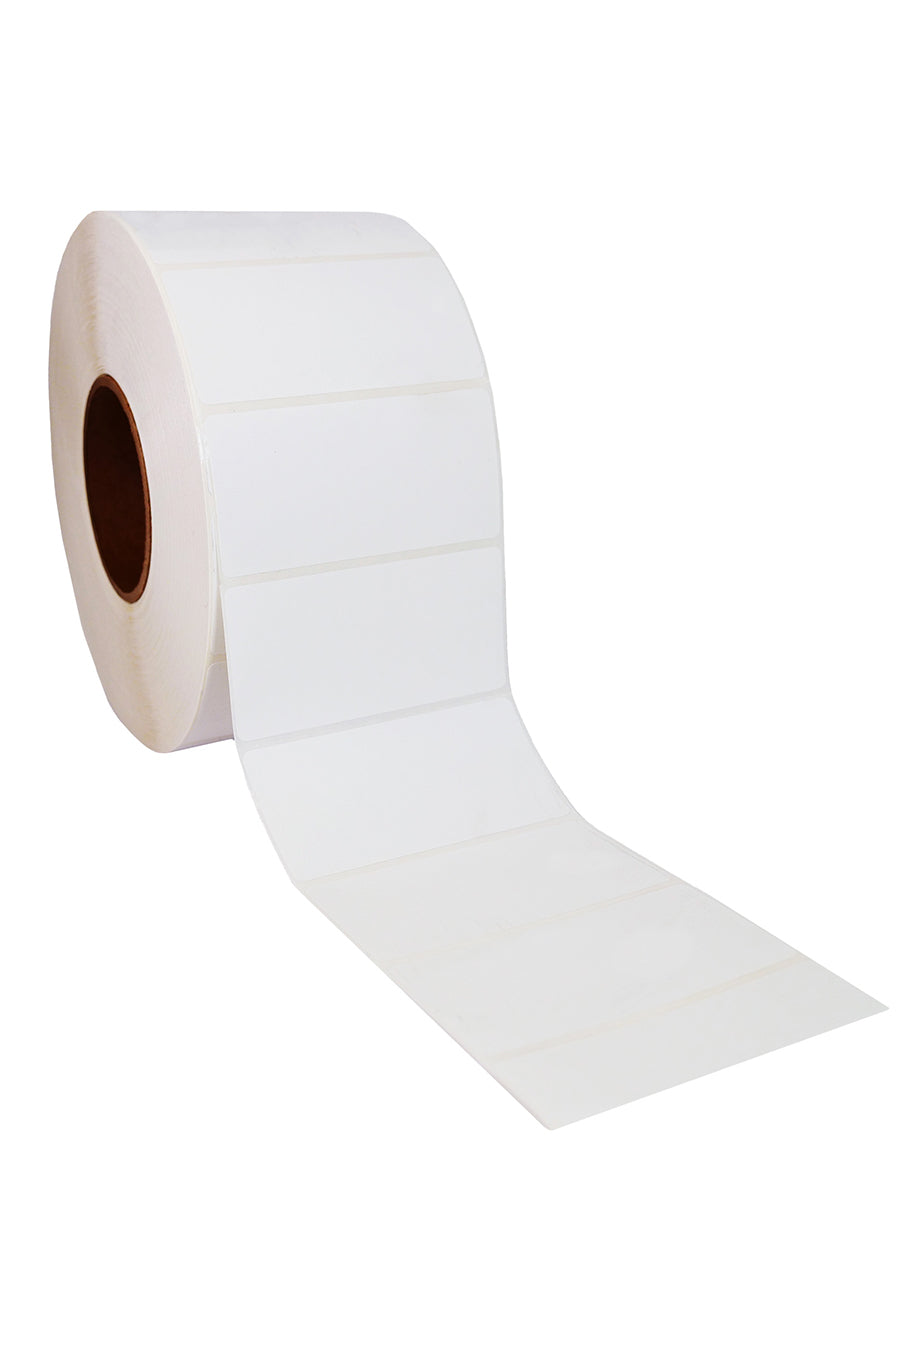 Thermal Transfer White Shipping Labels, 4" x 2", 2750/Roll, 4 Rolls/Ea